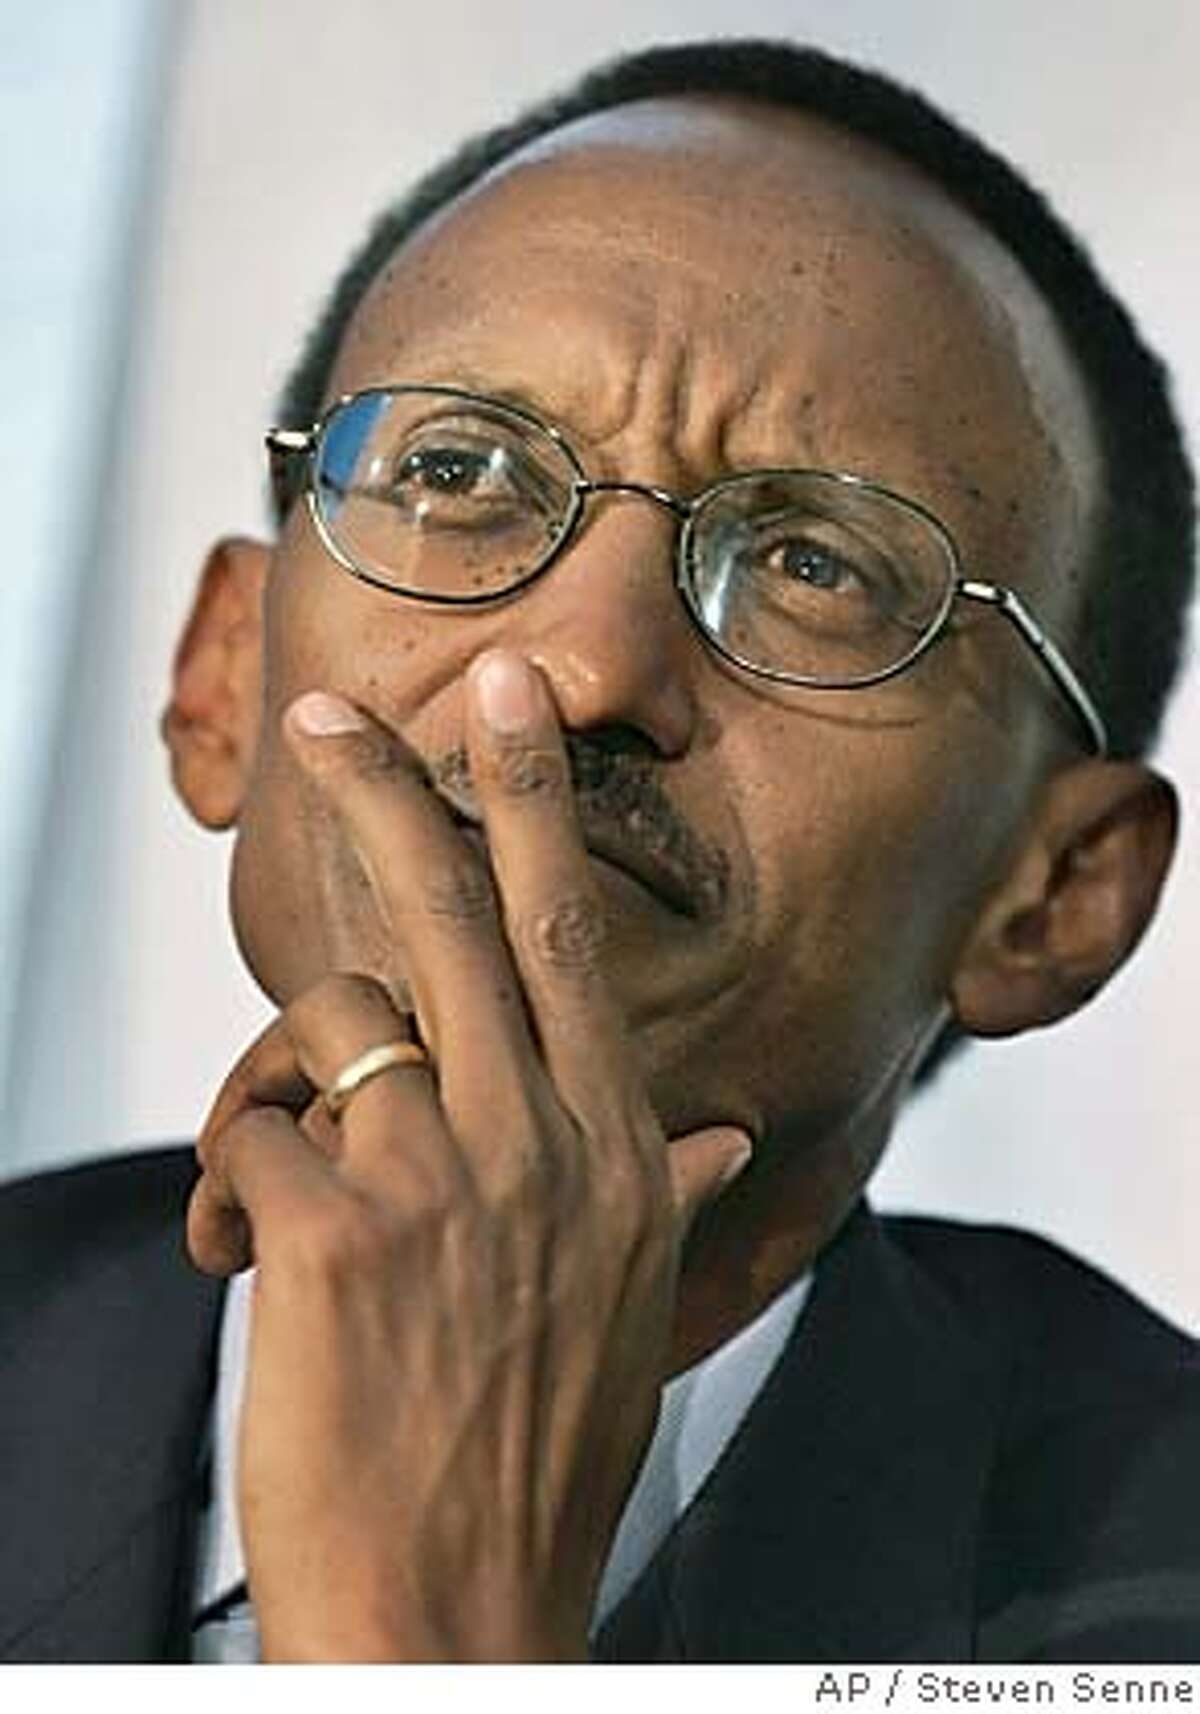 President of Rwanda, Paul Kagame, responds to a question while facing reporters at the Statehouse, in Boston, Monday, April 11, 2005. During remarks Kagame said he hopes to move Rwanda beyond its tragic recent history by boosting development in the country, in part by luring manufacturers and "eco-tourists." (AP Photo/Steven Senne) Ran on: 04-19-2005 Rwandan President Paul Kagame was awarded an honorary degree in Stockton.